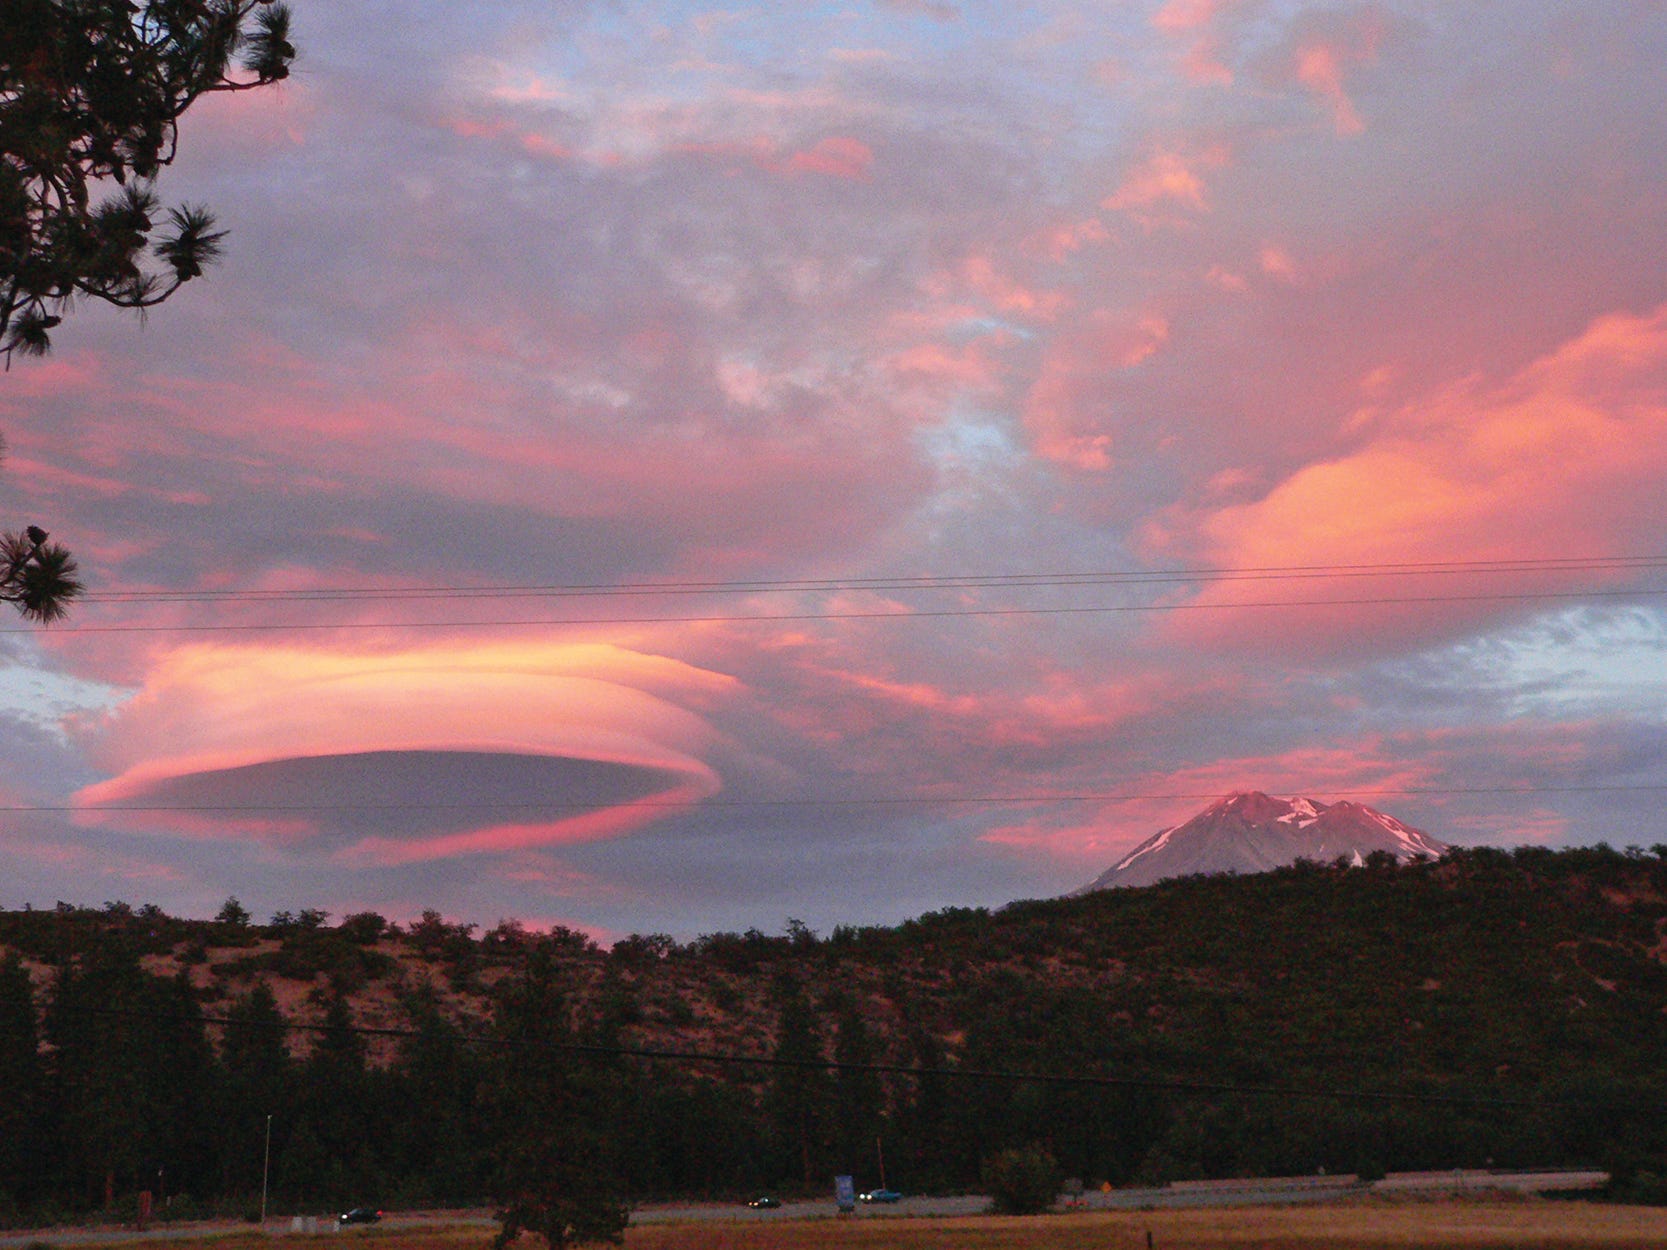 The last rays of the day's sun make Mt. Shasta and a disc-shaped lenticular glow pink.